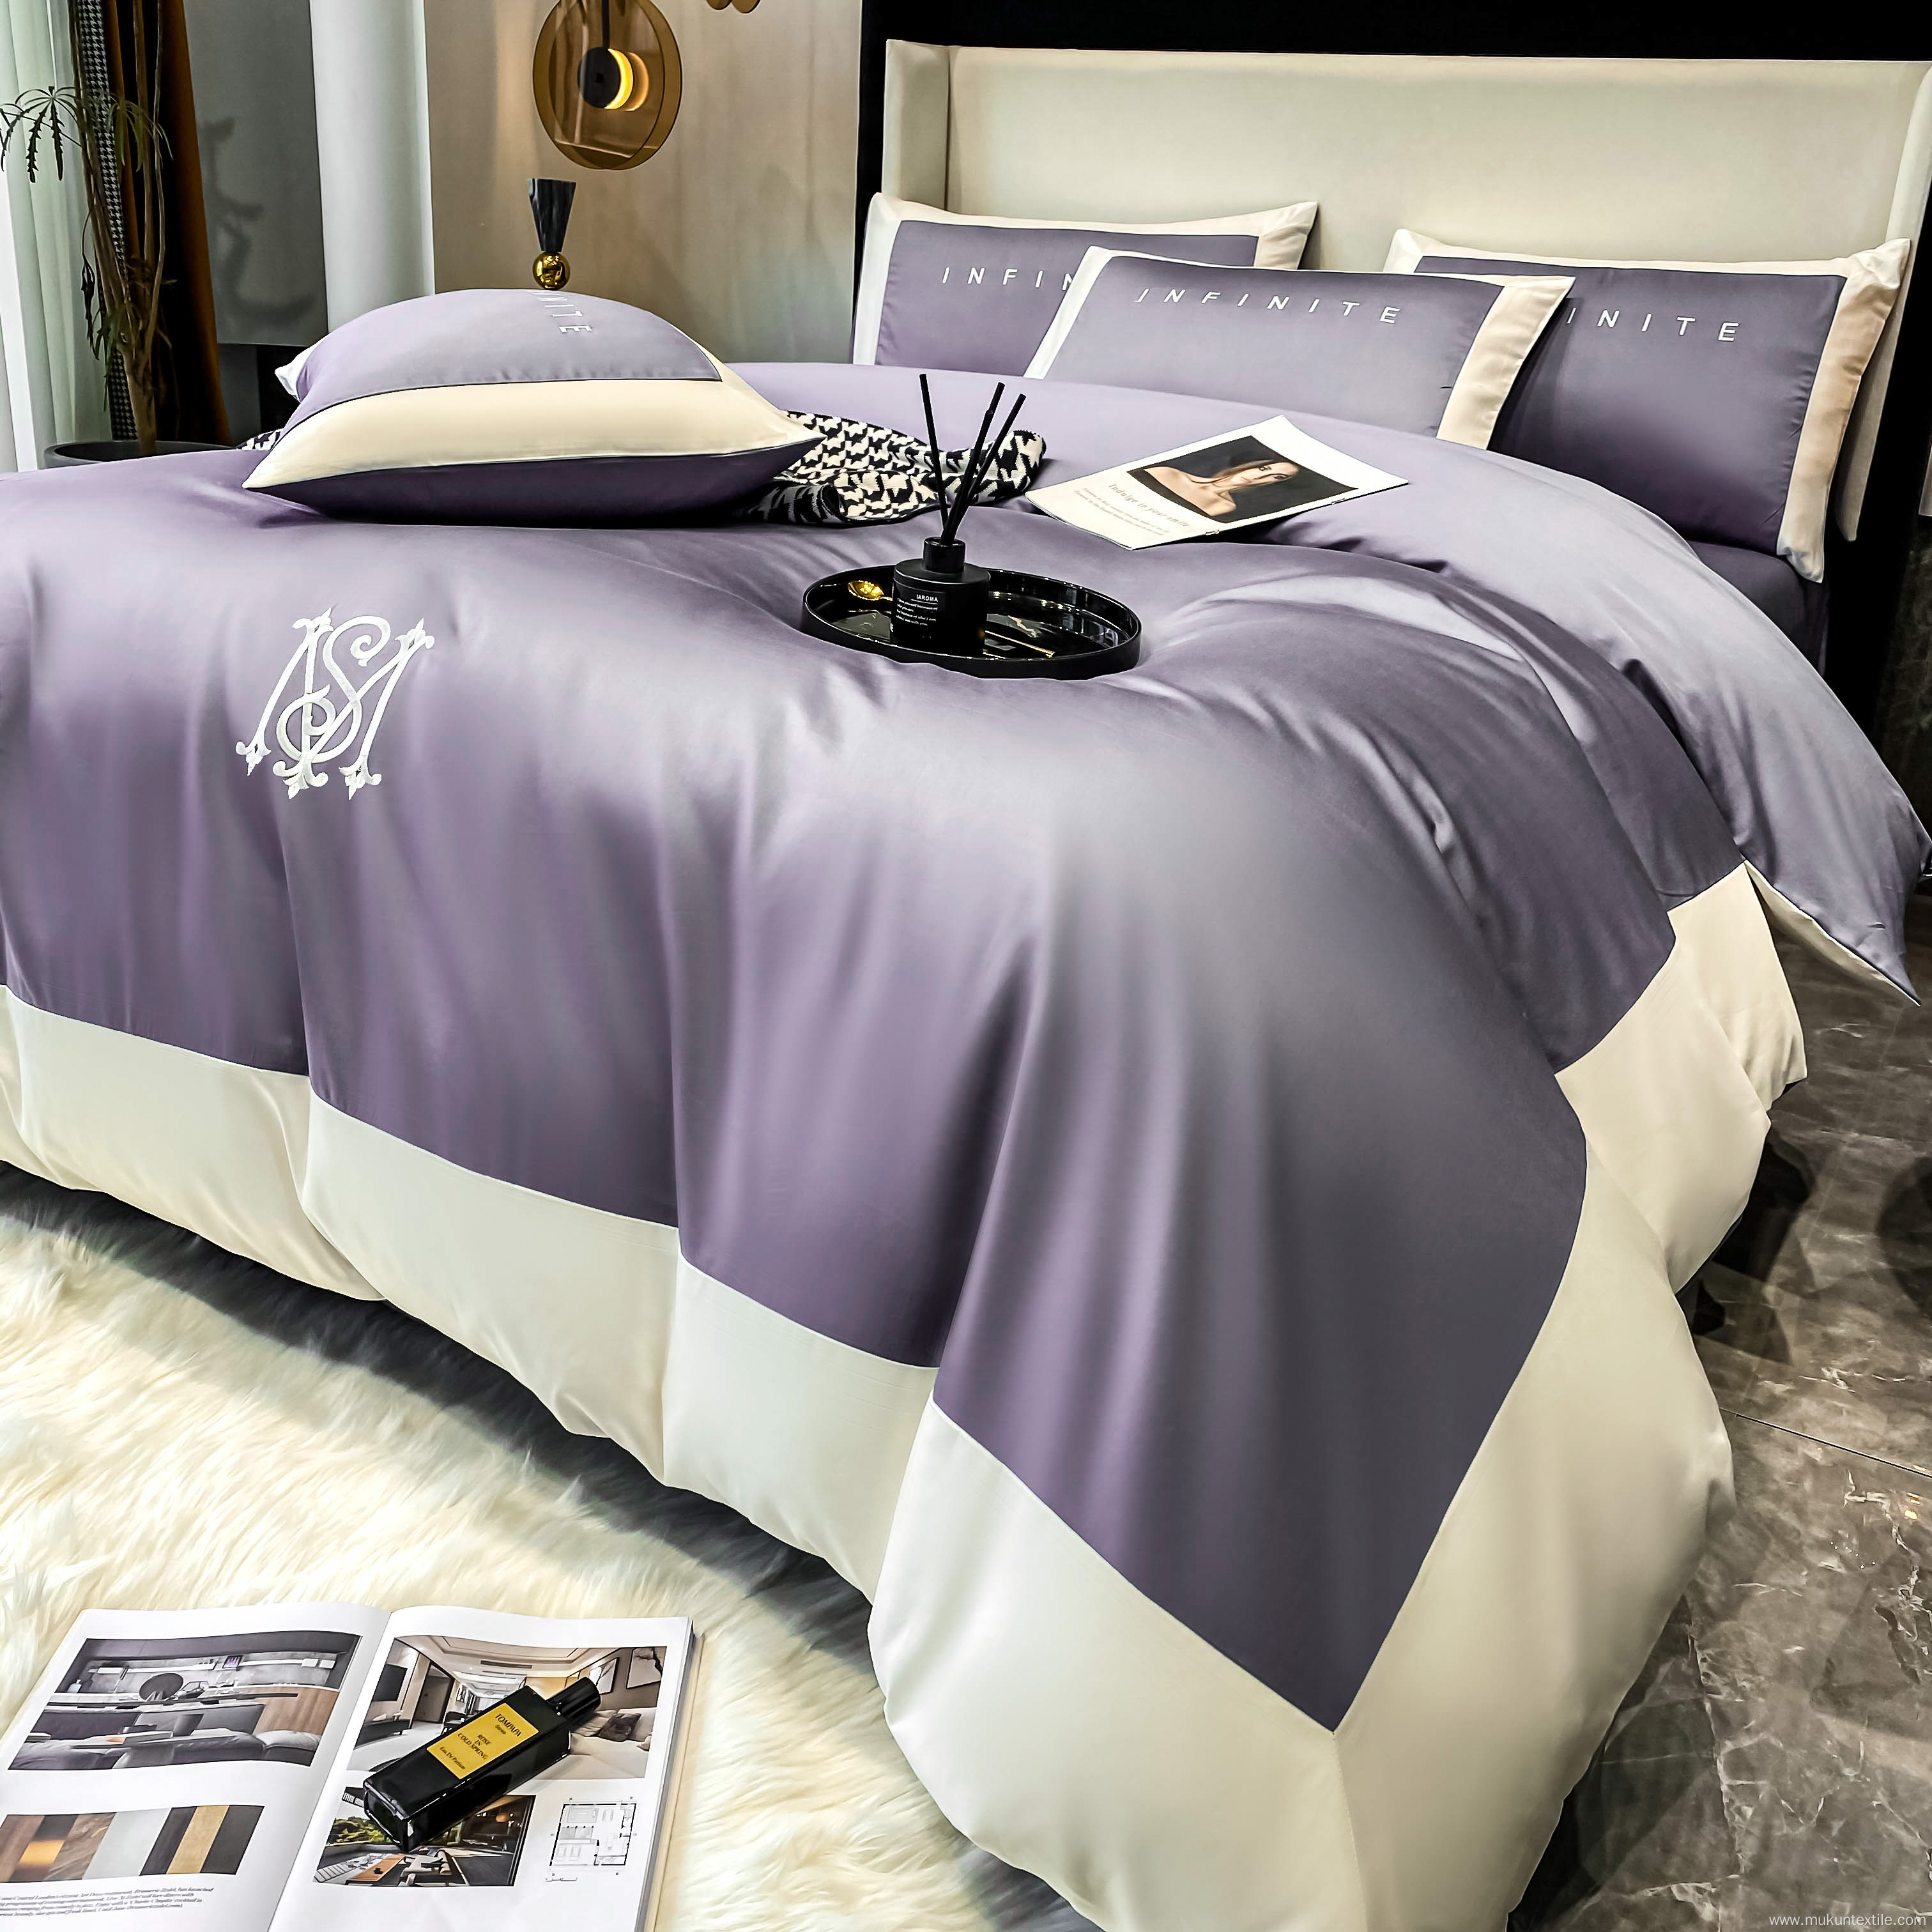 embroidery quality comforter king size cotton bedding set